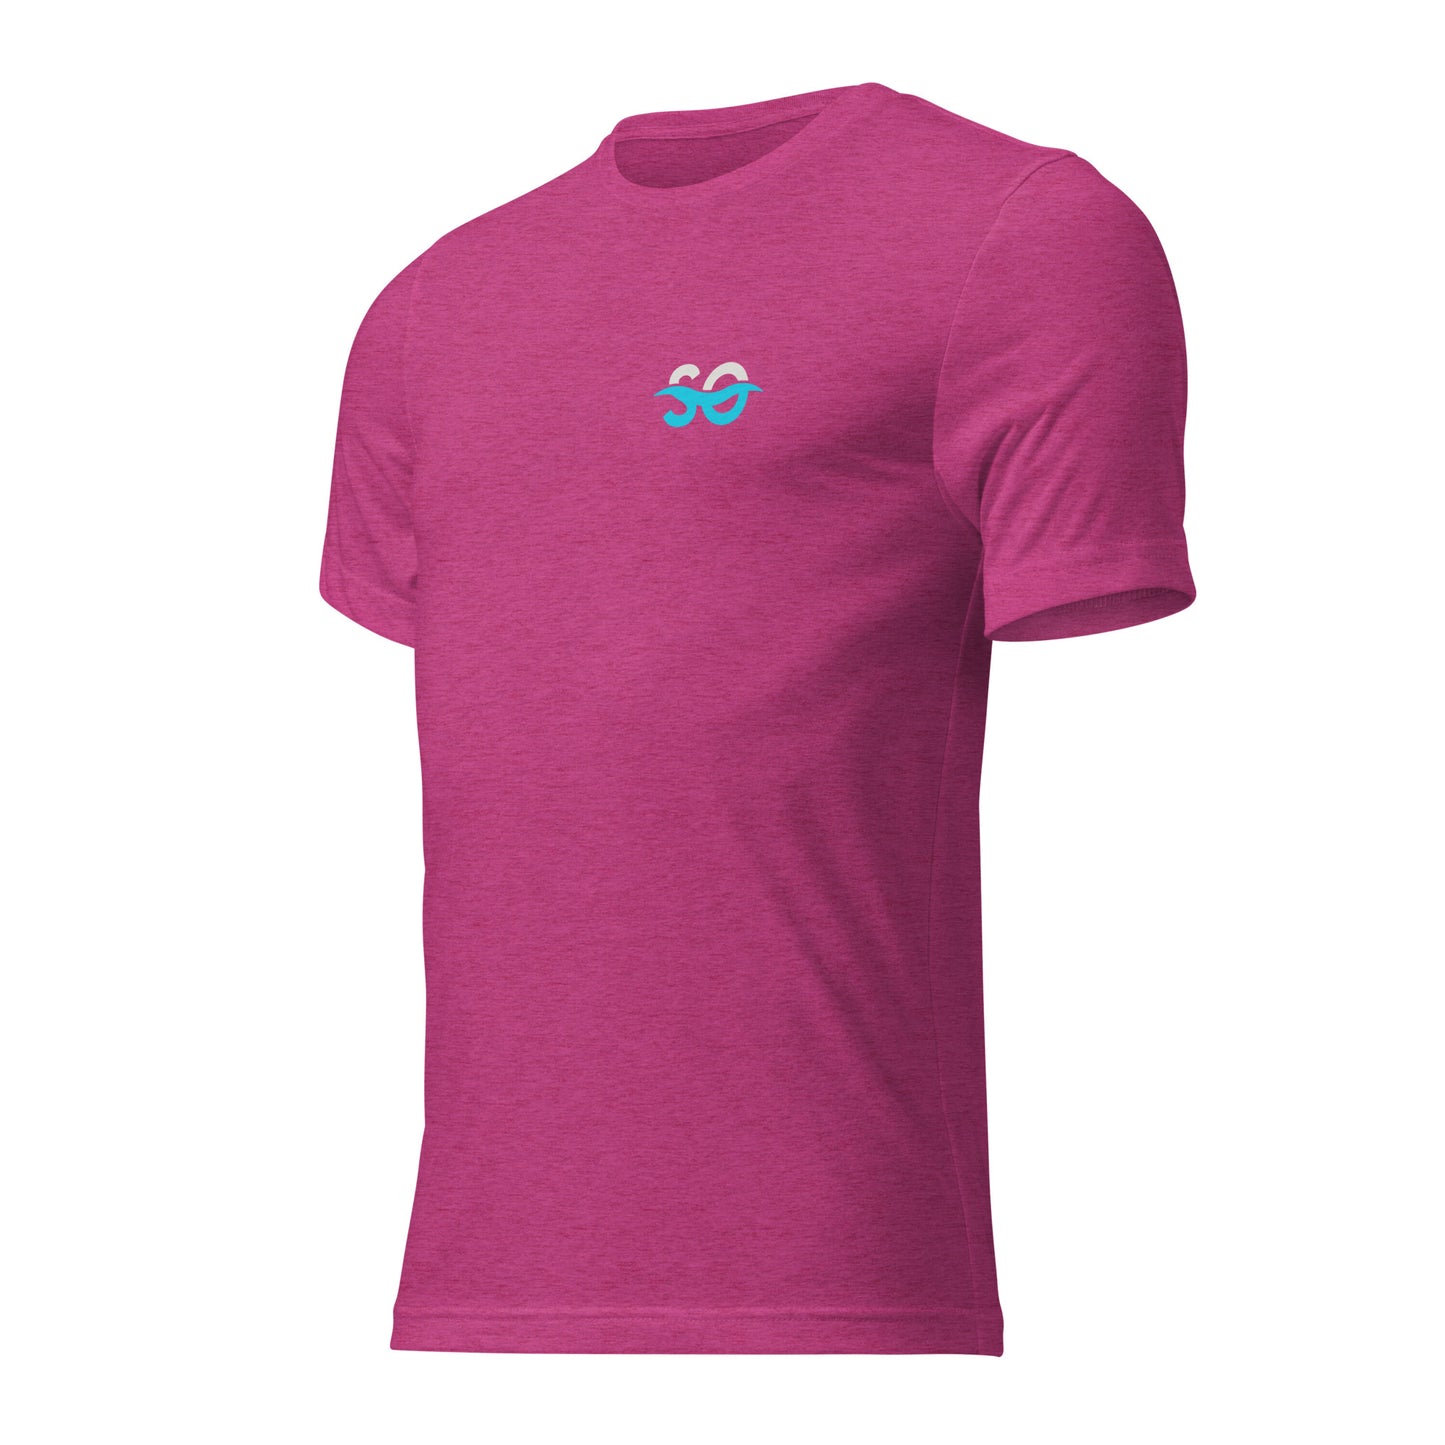 a pink t - shirt with a blue logo on the chest